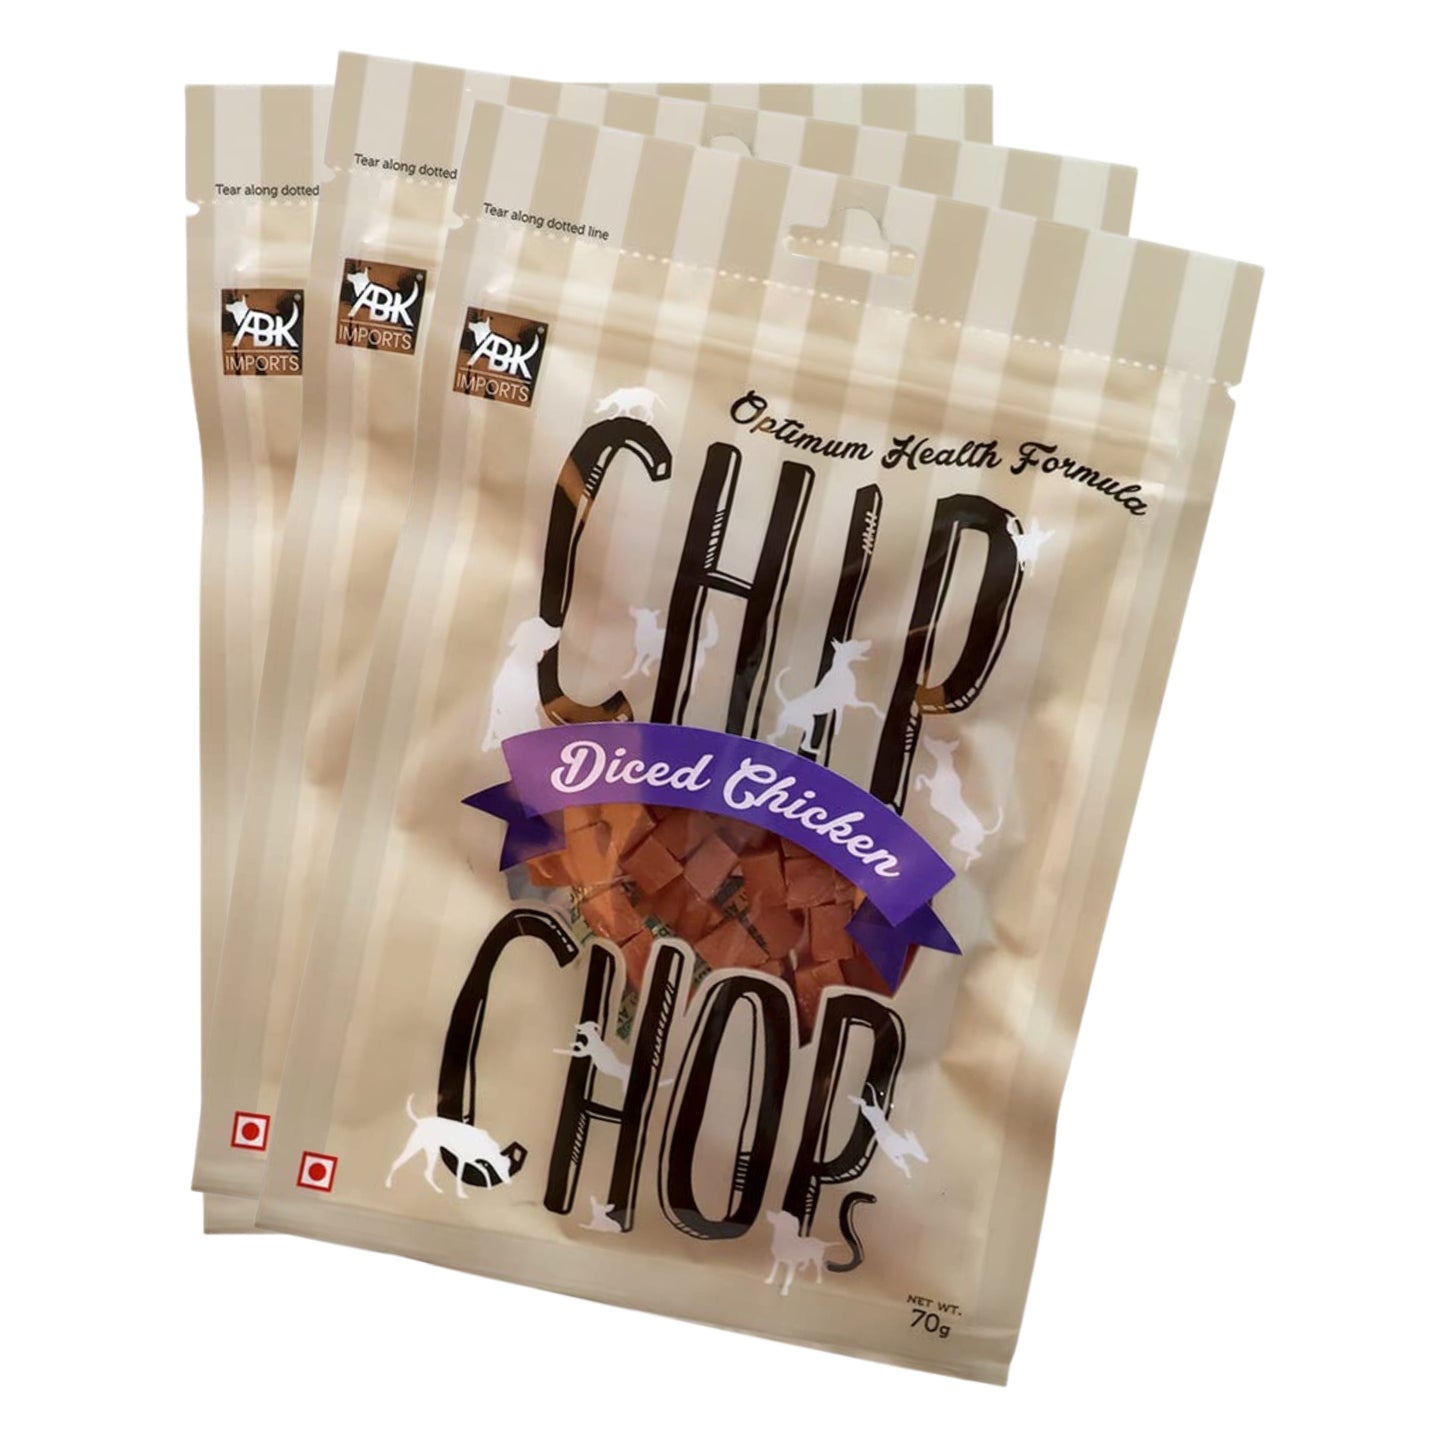 Chip Chops Dog Treats - Diced Chicken (70gm, Pack of 3)